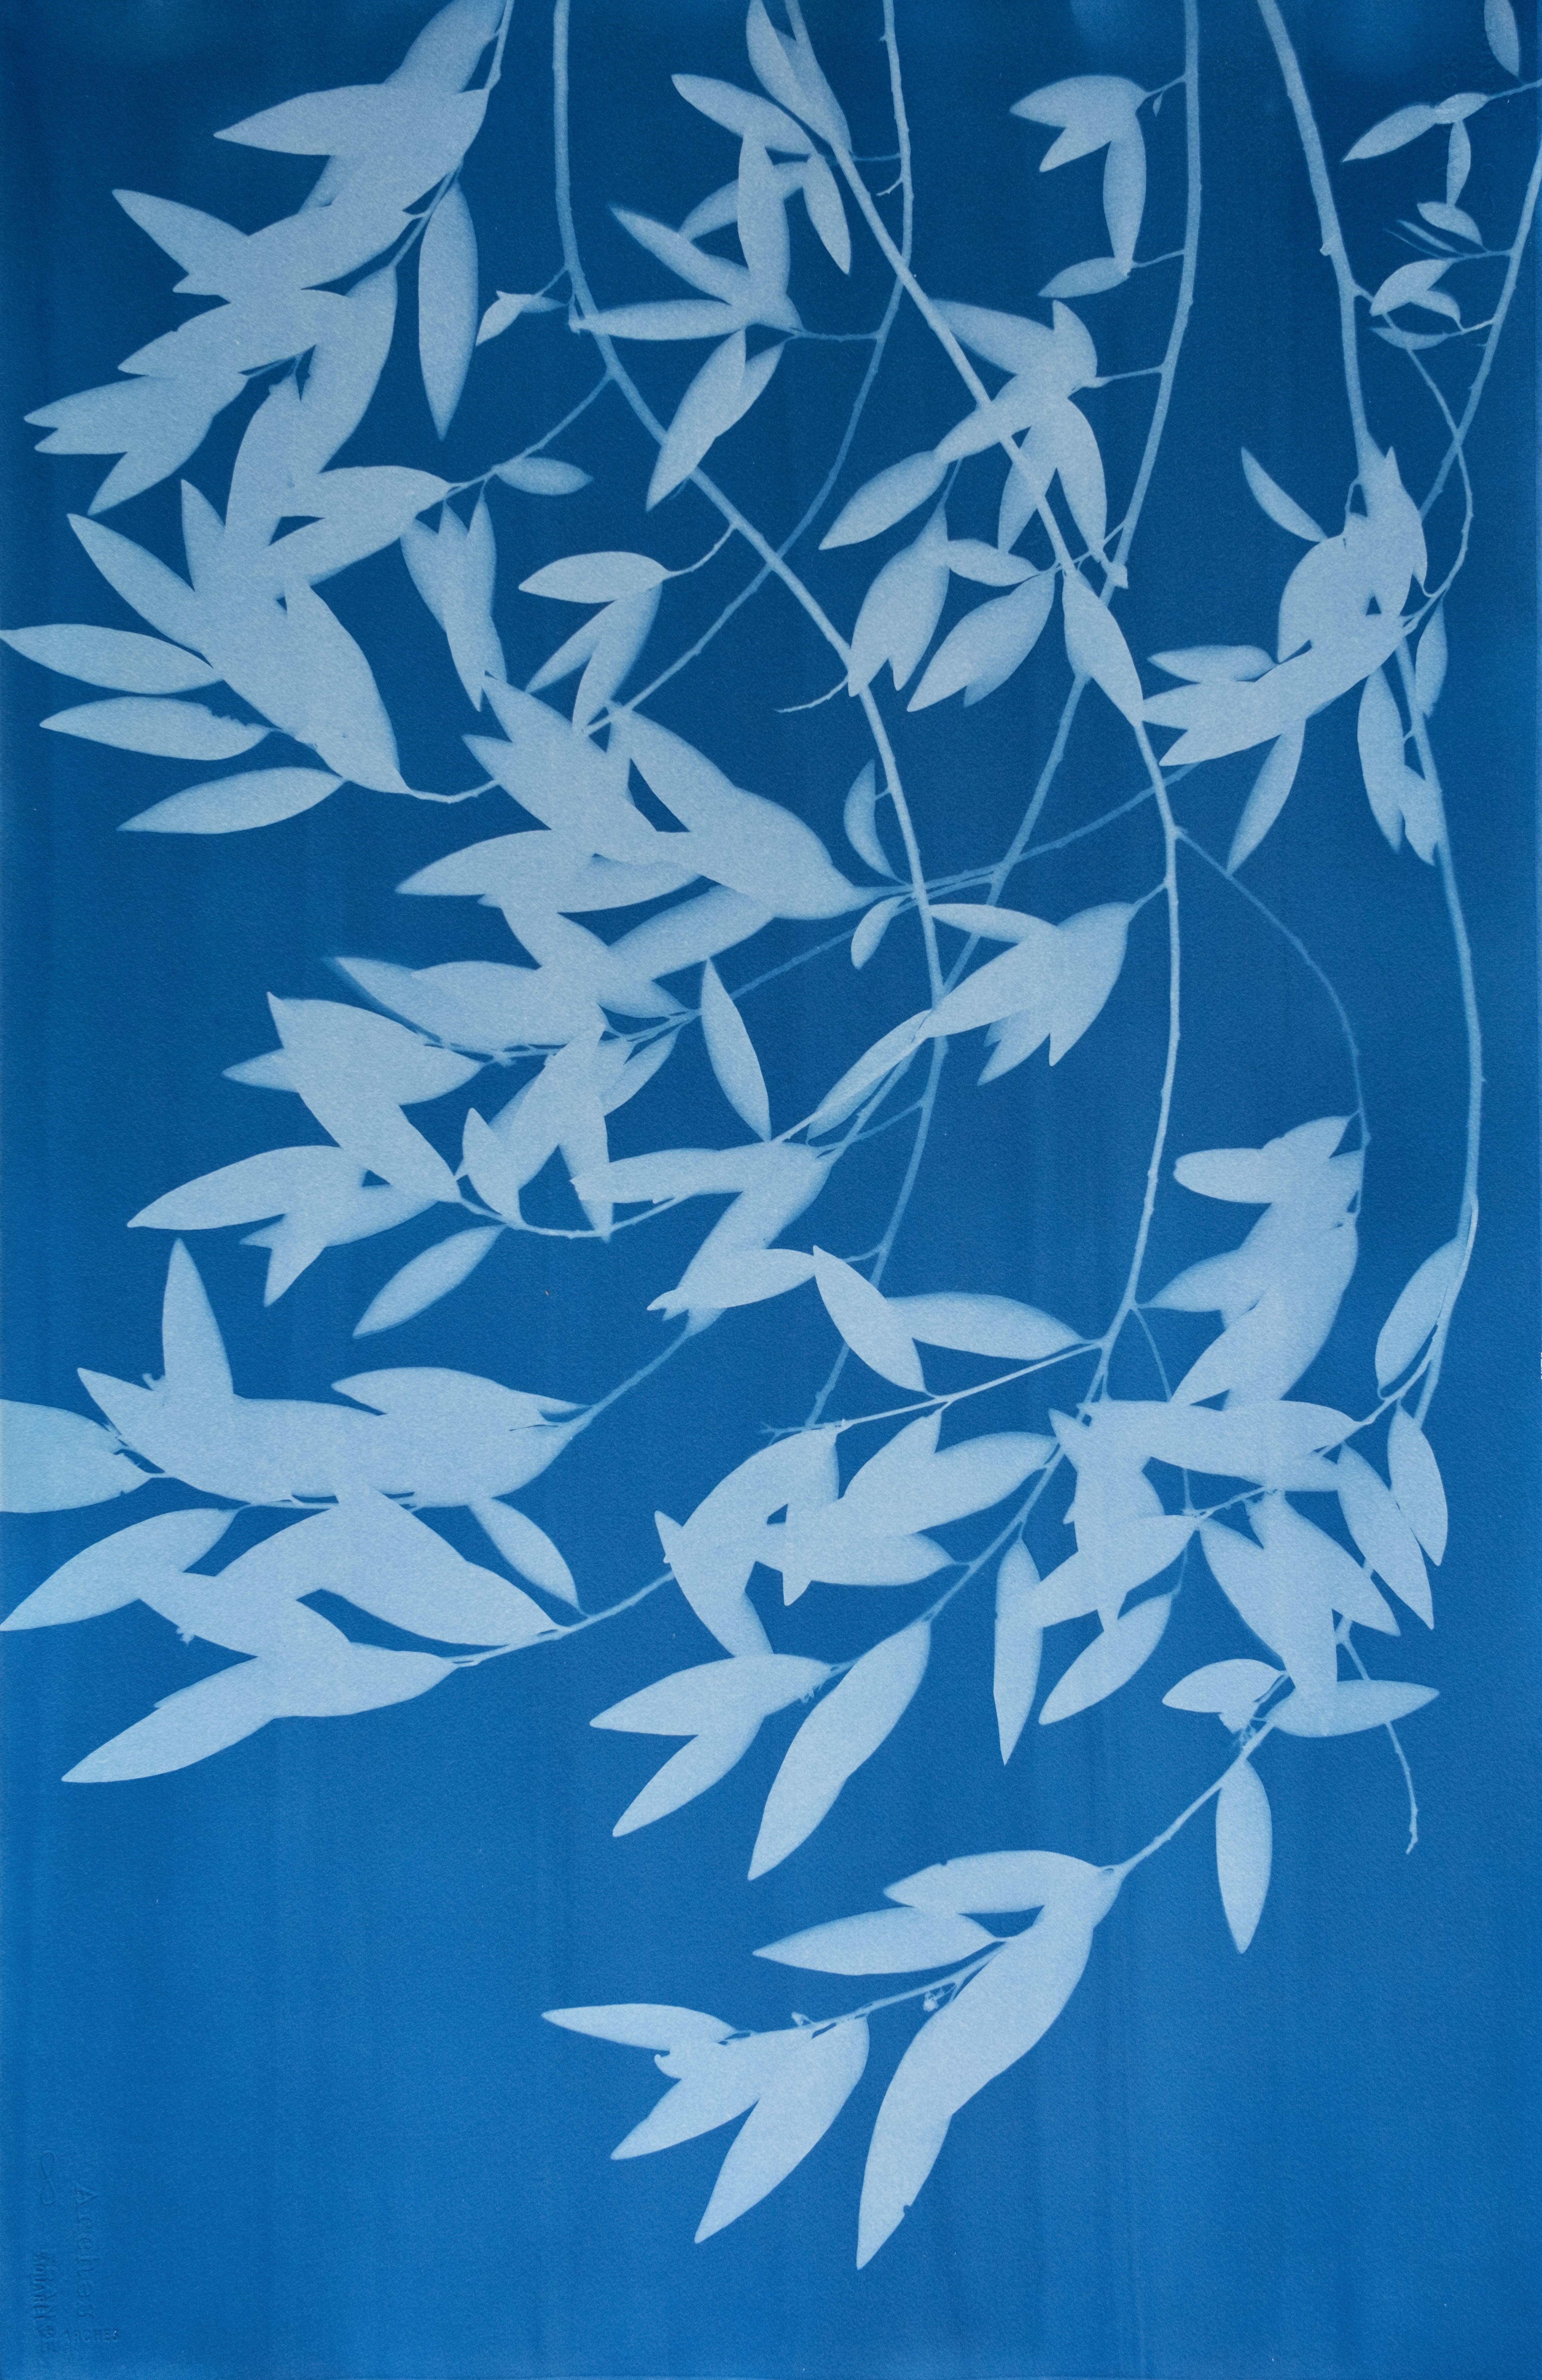 Night Laurel Diptych (Hand-printed cyanotype, 40 x 52 inches combined) - Photograph by Christine So